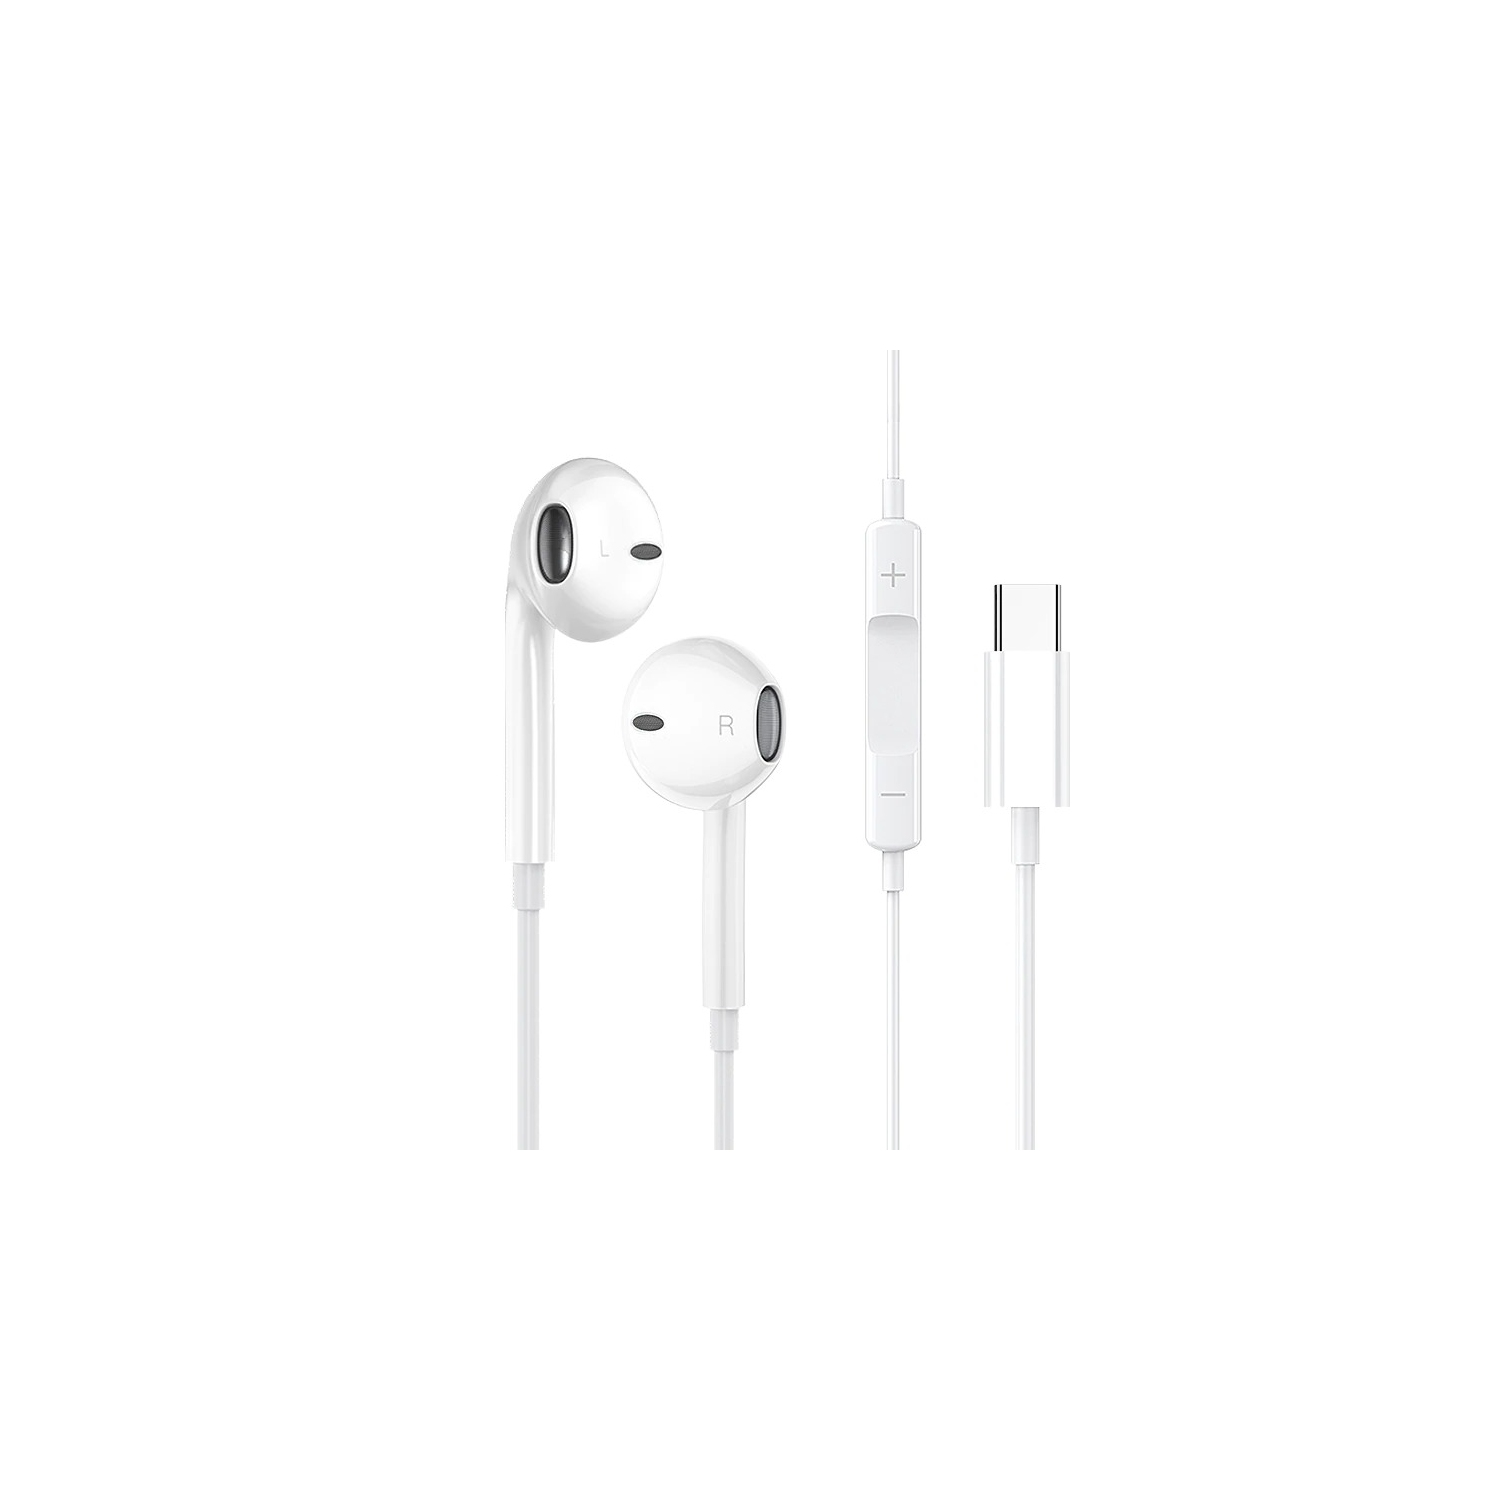 SuperShield Type C USB-C Earphones Headphones Headsets with Mic & Volume Control for Huawei LG Google Samsung S8 S9 S10 Plus S20 S21 FE S22 Ultra Note, White